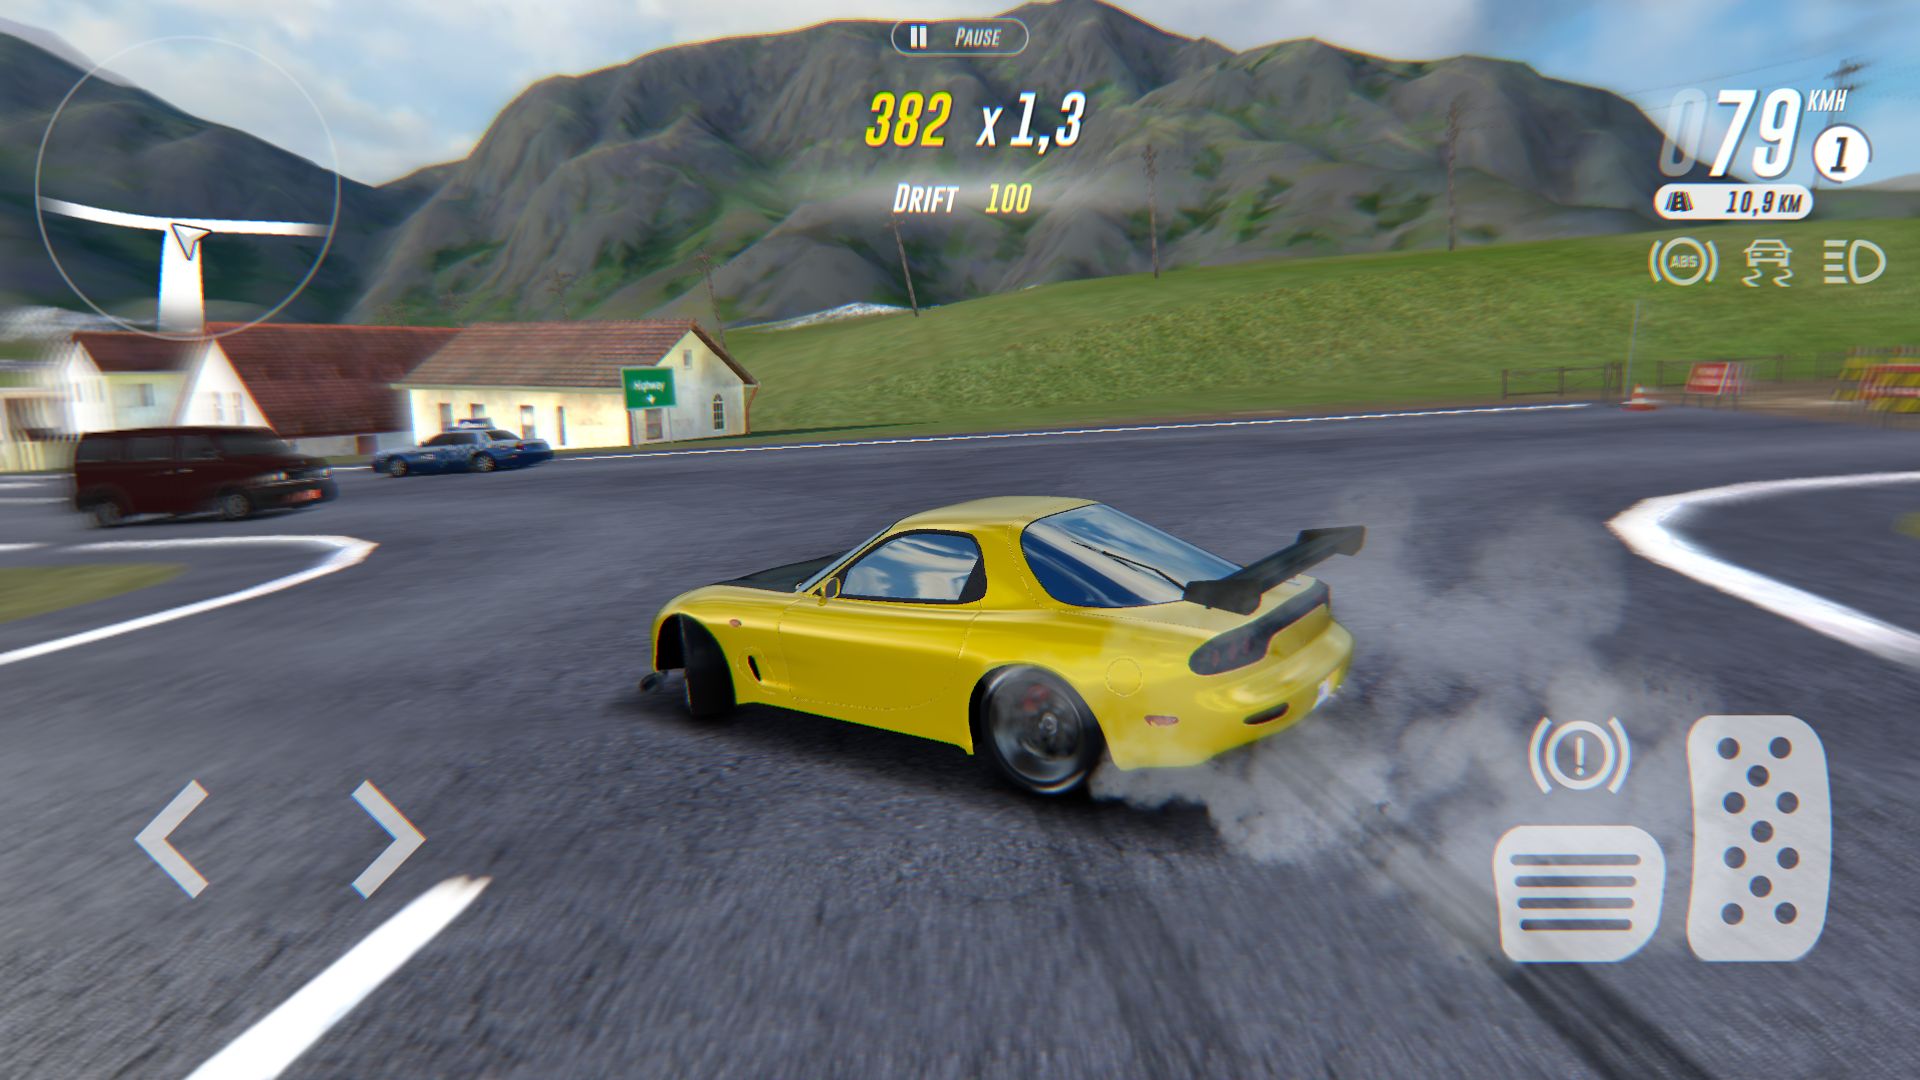 Gameplay of the Horizon Driving Simulator for Android phone or tablet.